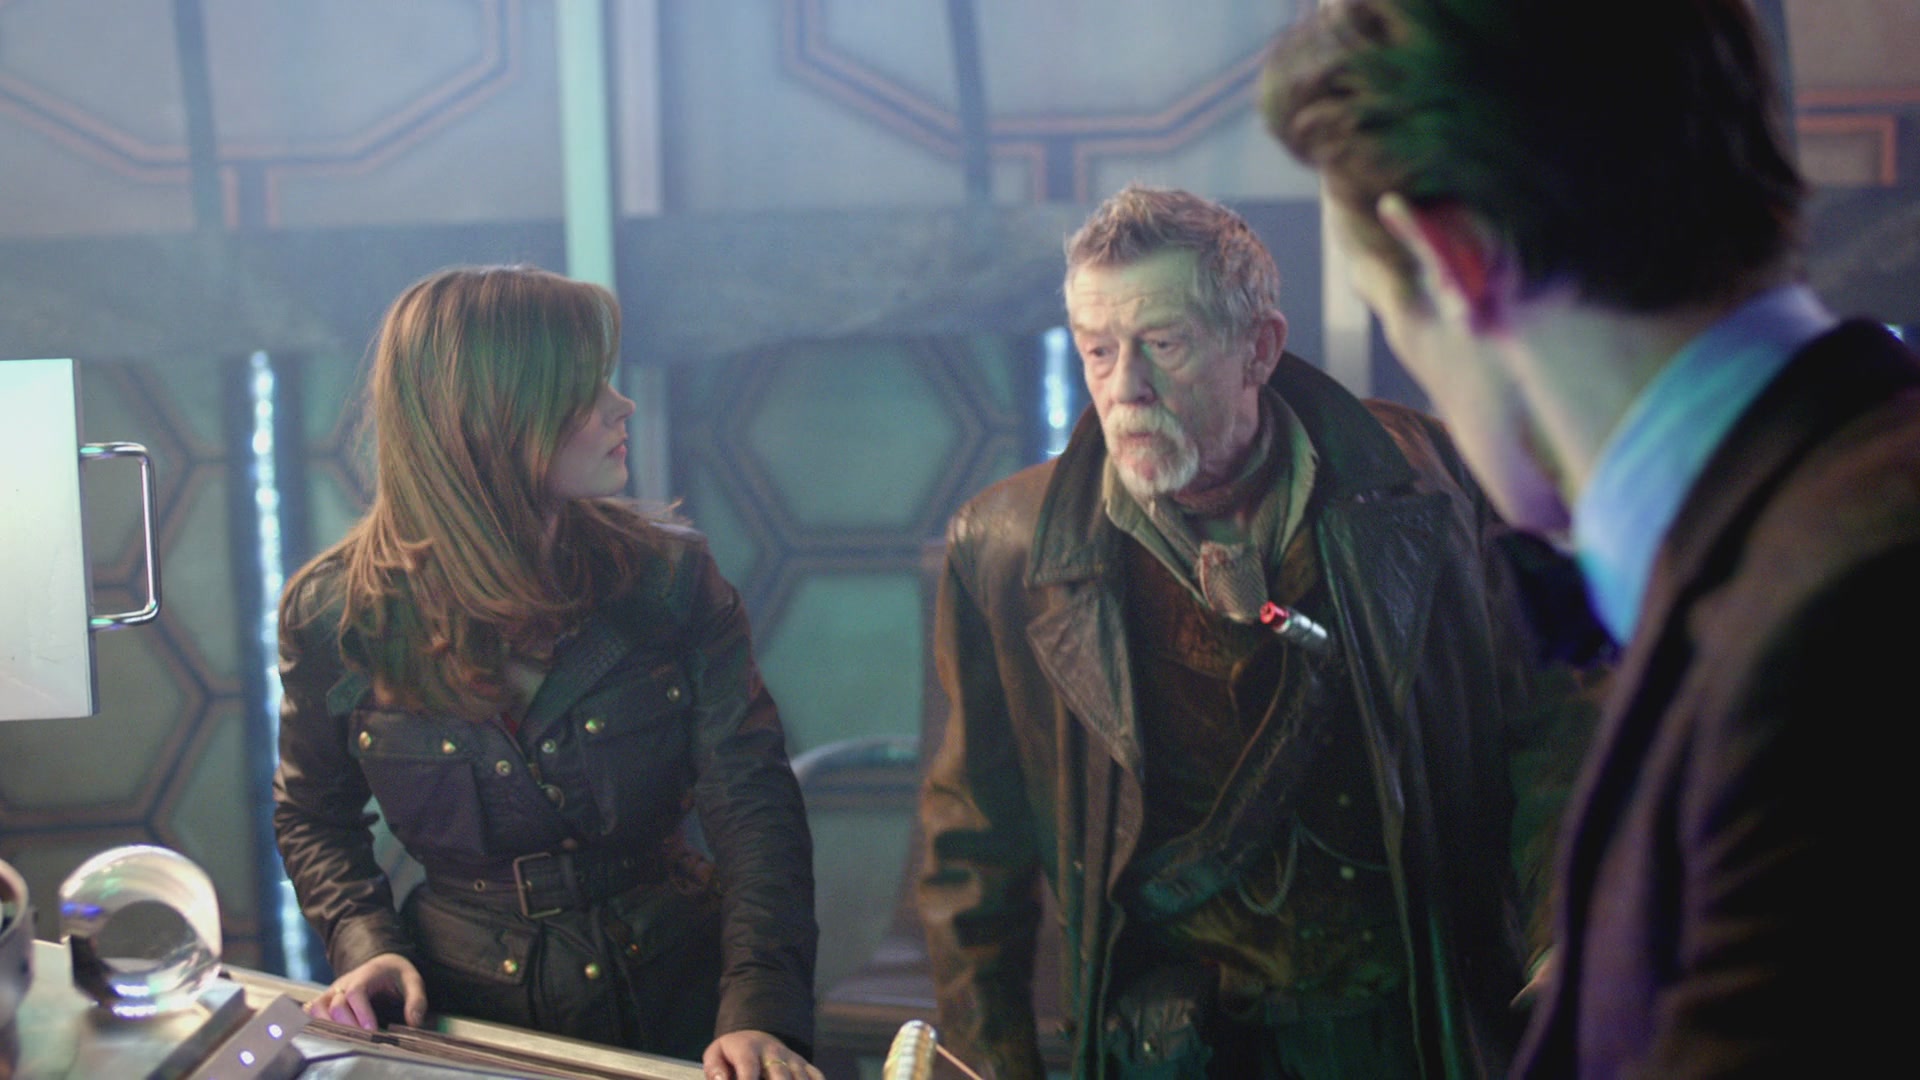 DayOfTheDoctor-Caps-0937.jpg